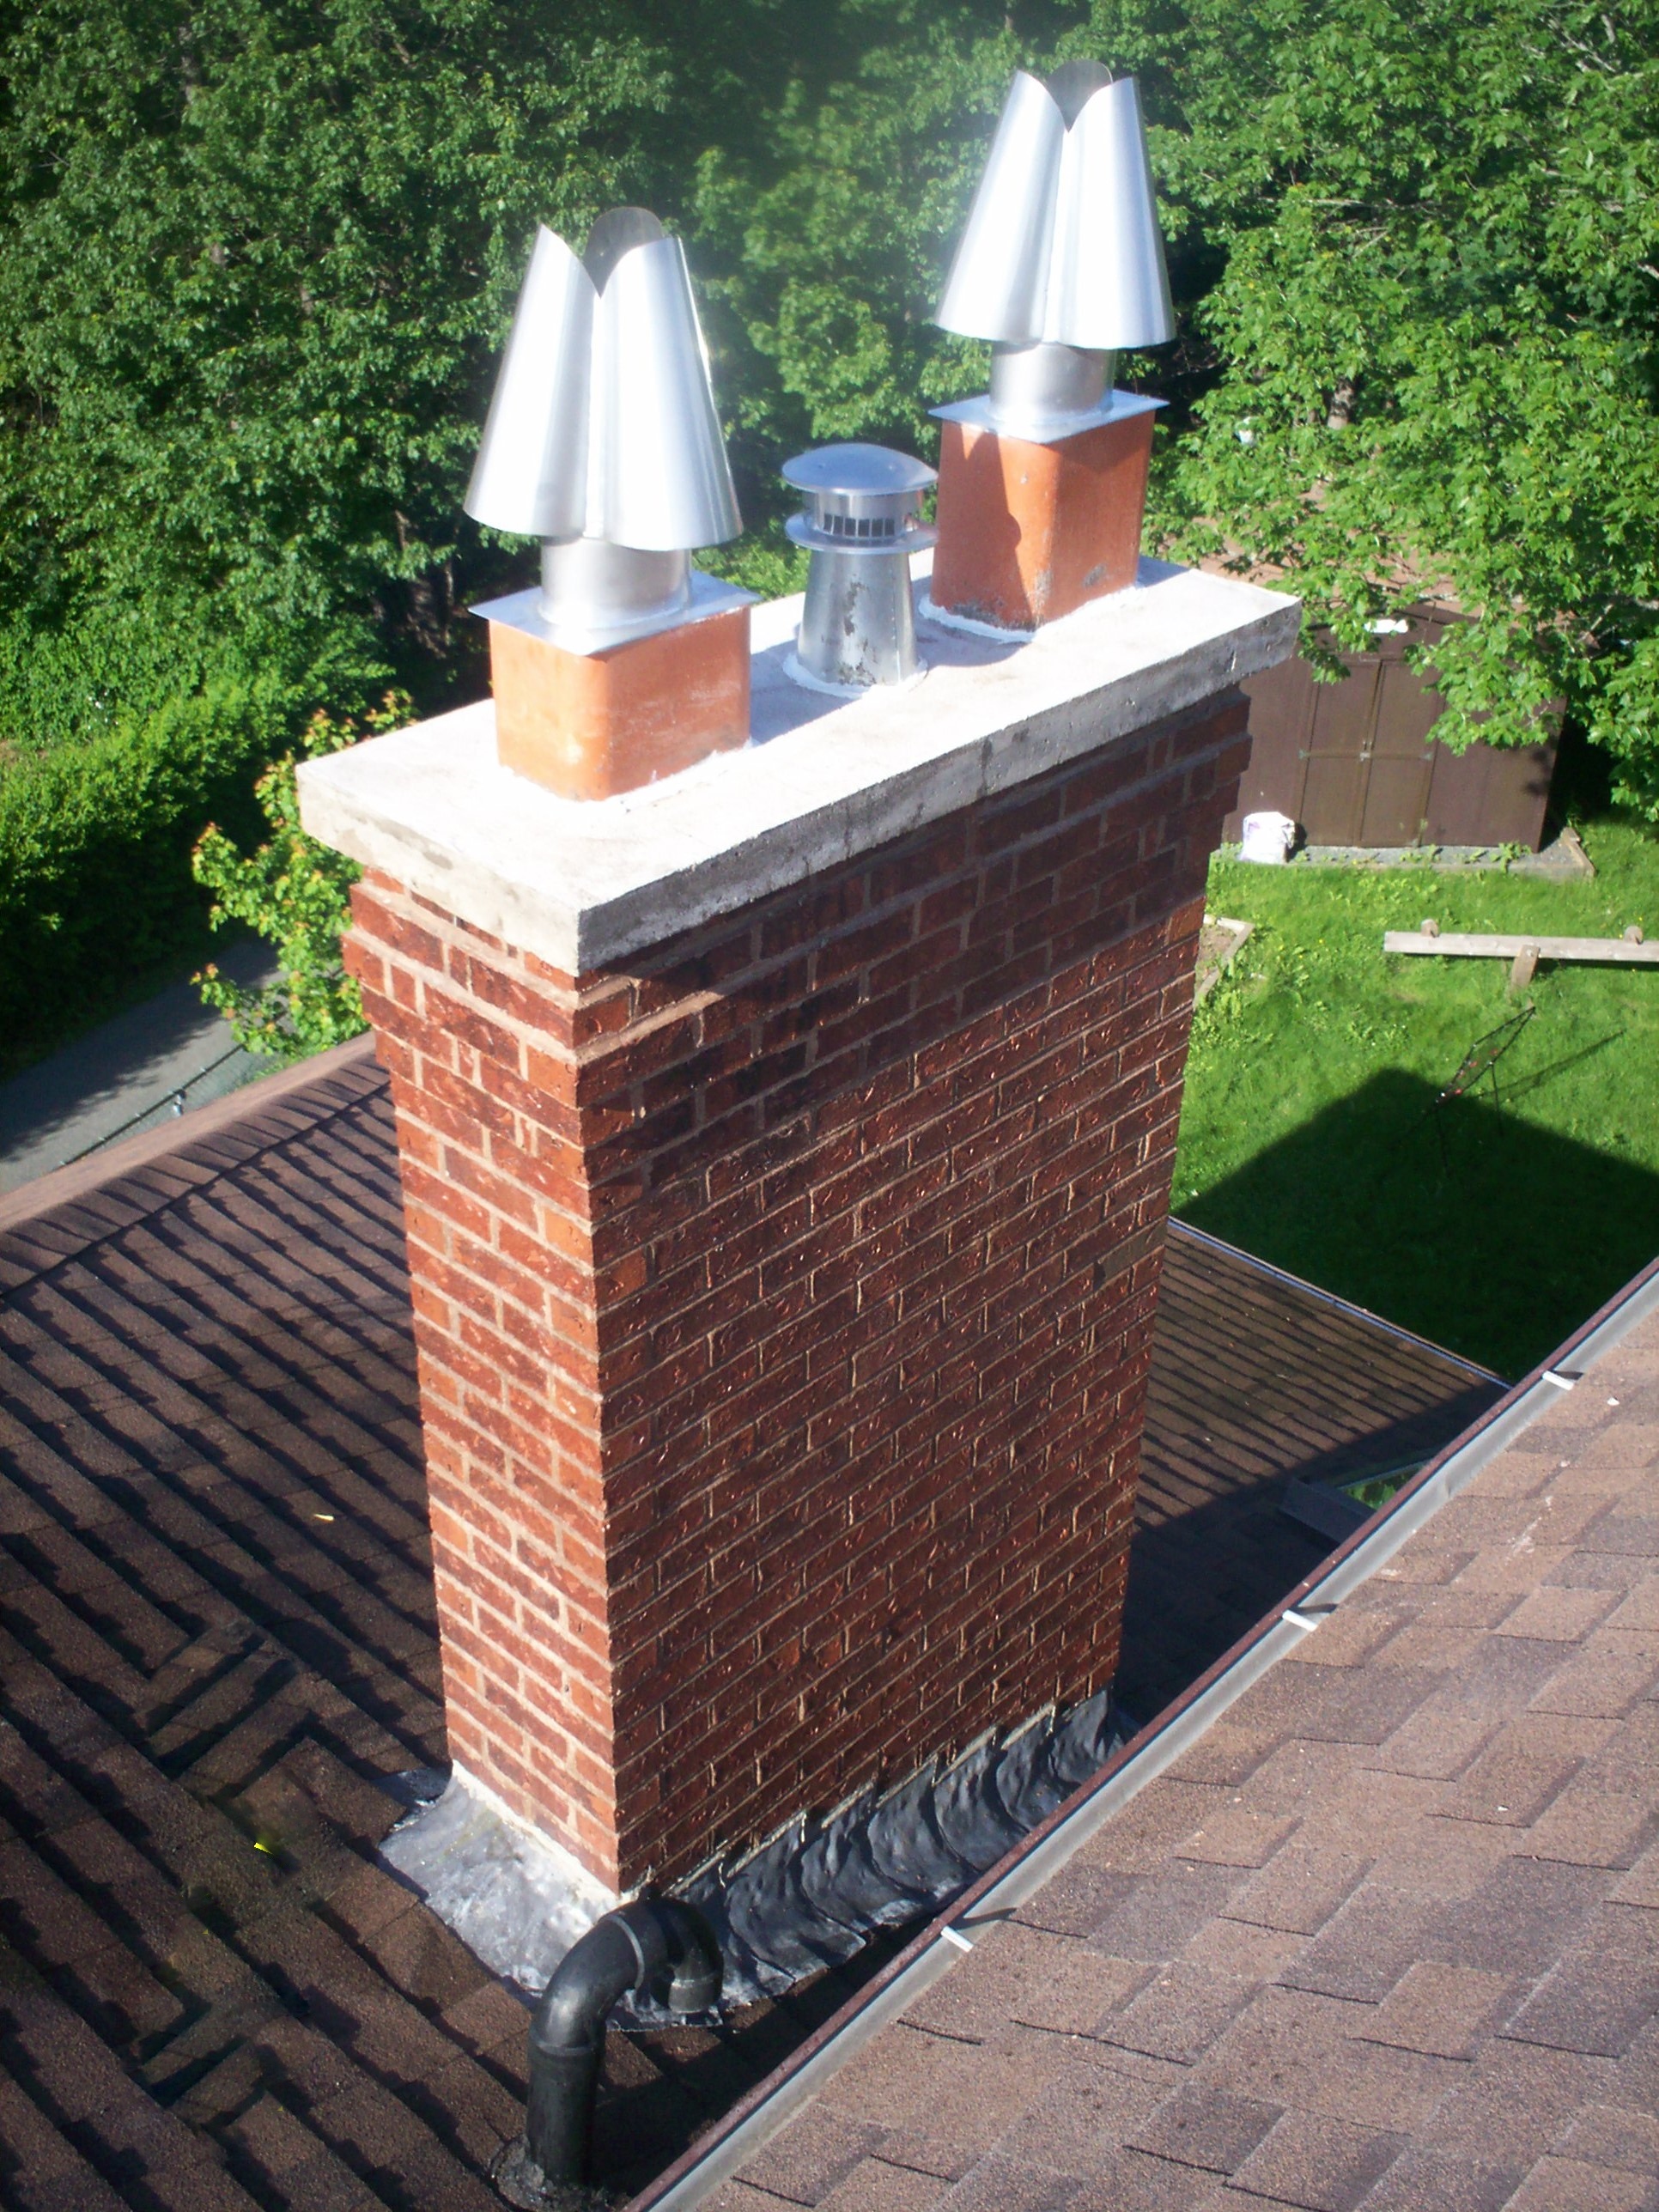 image of chimney crown or cap-chimney cap or crowmservices completed in Halifax-Dartmouth Regional Municipality, NS by Pro Chimney Services based in Halifax, NS servicing all of the Halifax-Dartmouth Regional Municipality, Bedford, Sackville, Mount Uniacke, Windsor, Hantsport , Wolfville, Kentville, Chester, Mahone Bay, Lunenburg, Bridgewater, Liverpool, Fall River, Wellington, Enfield, Elmsdale, Brookfield, Truro, Musquodoboit Harbour & surrounding areas.